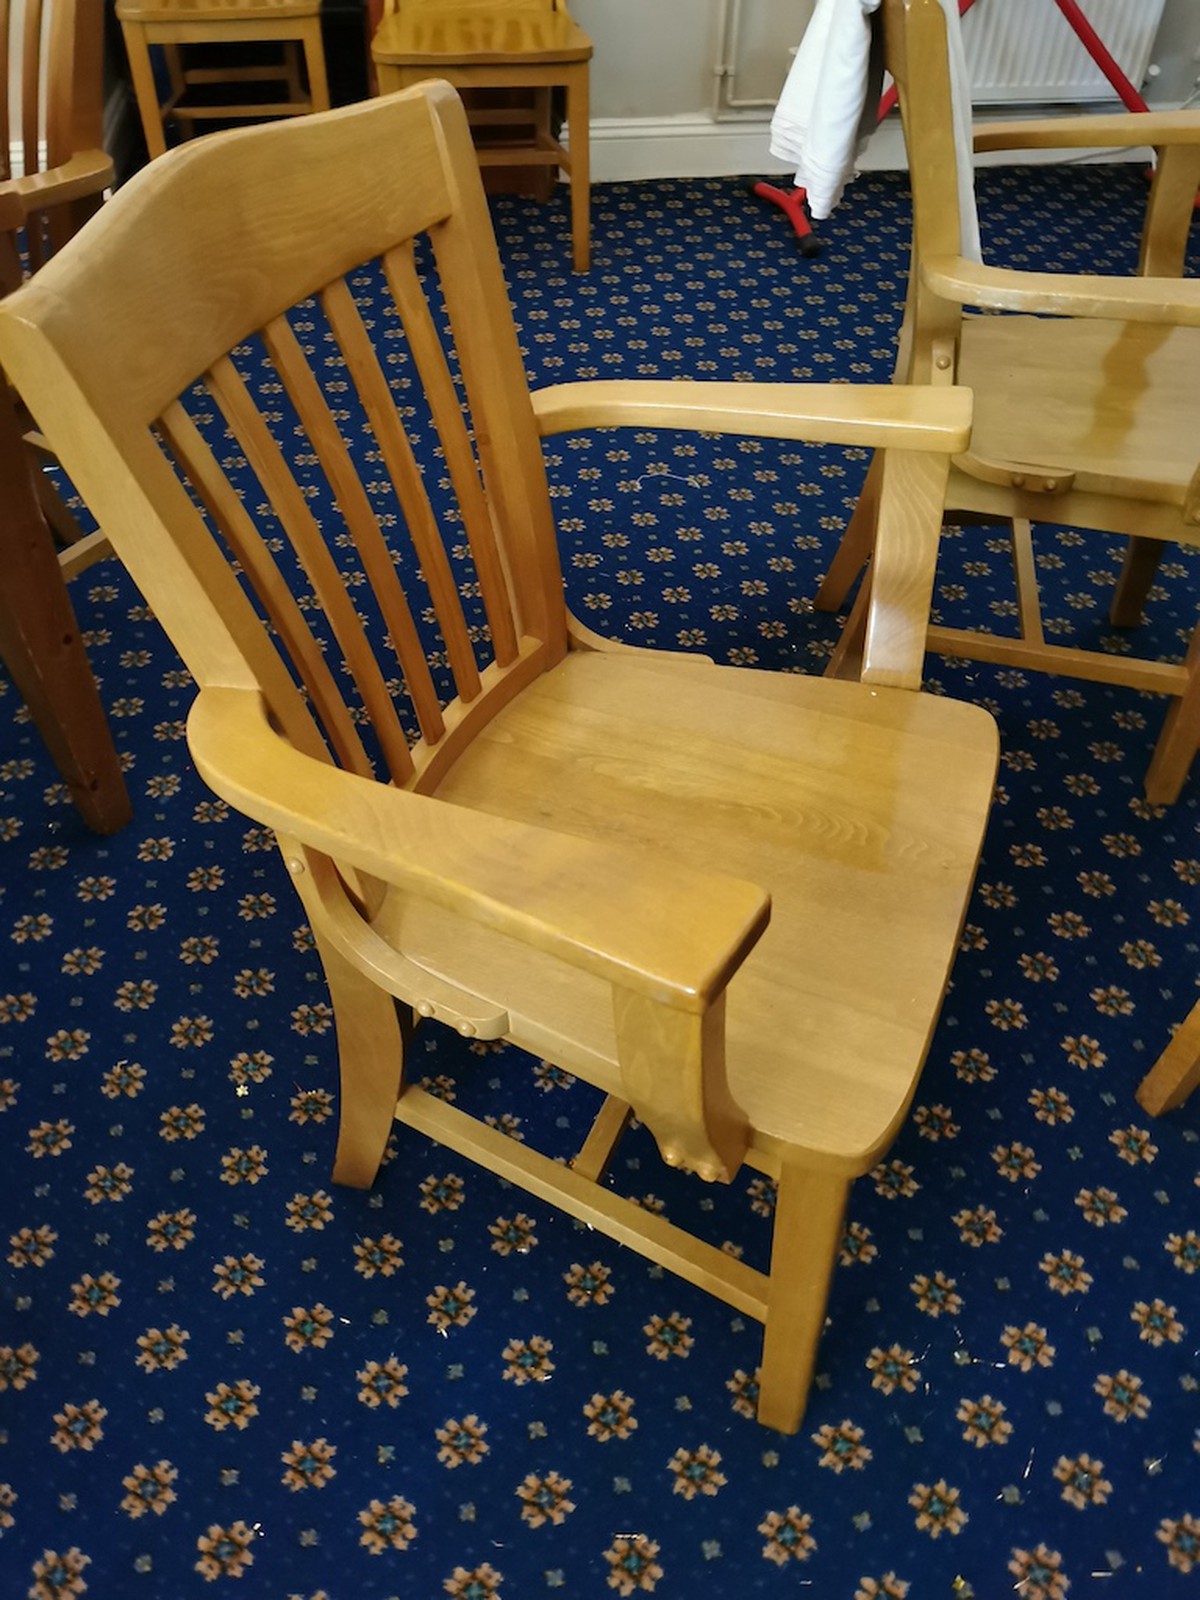 Secondhand Chairs And Tables | Restaurant Chairs | 12X Carver Chairs In Light  Oak Colour - Kent